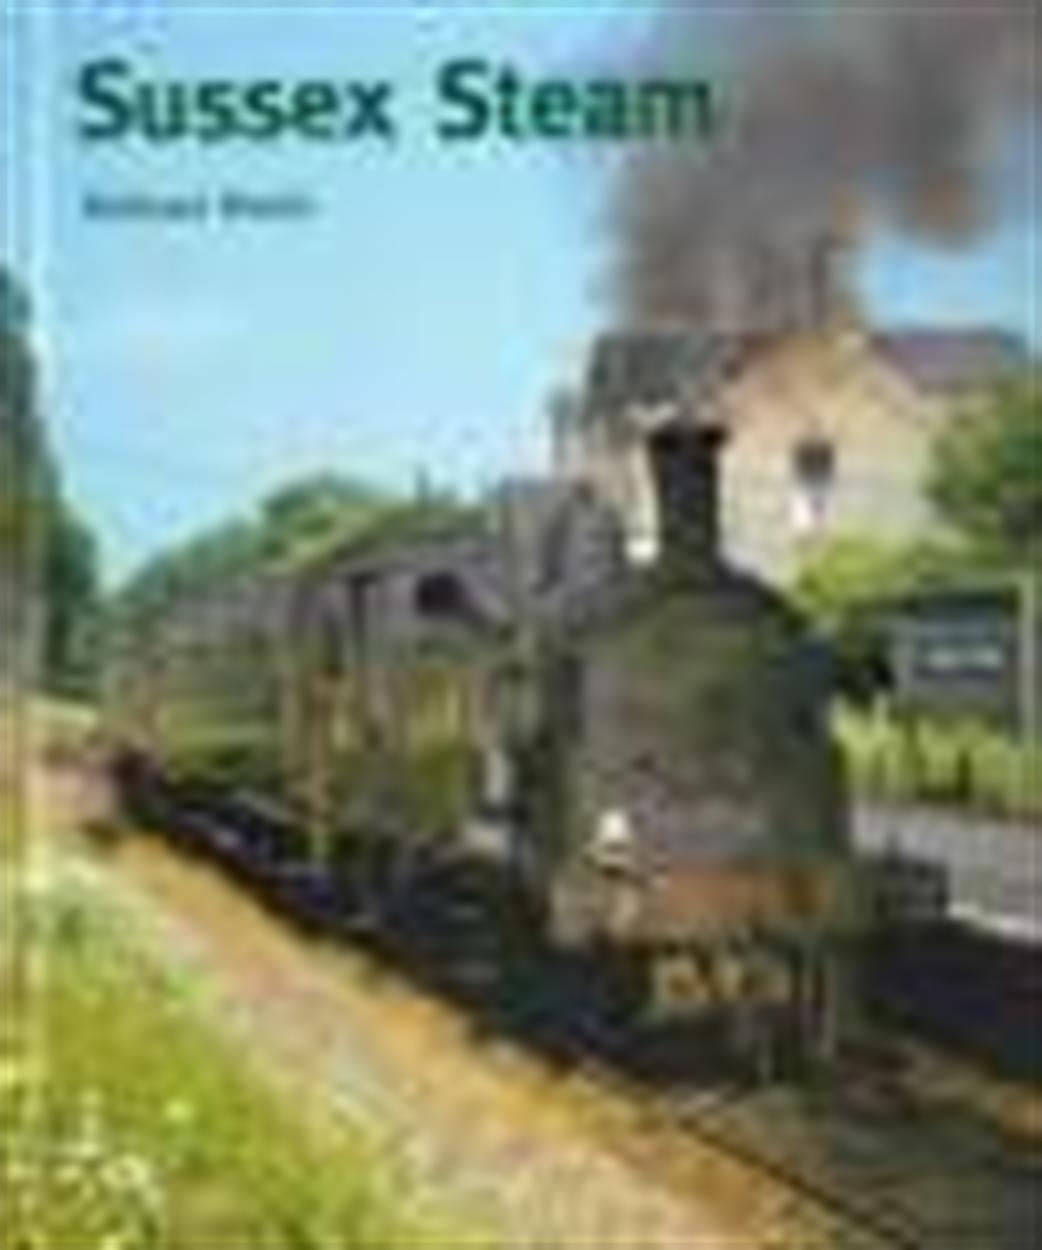 9781854143877 Sussex Steam by Michael Welsh